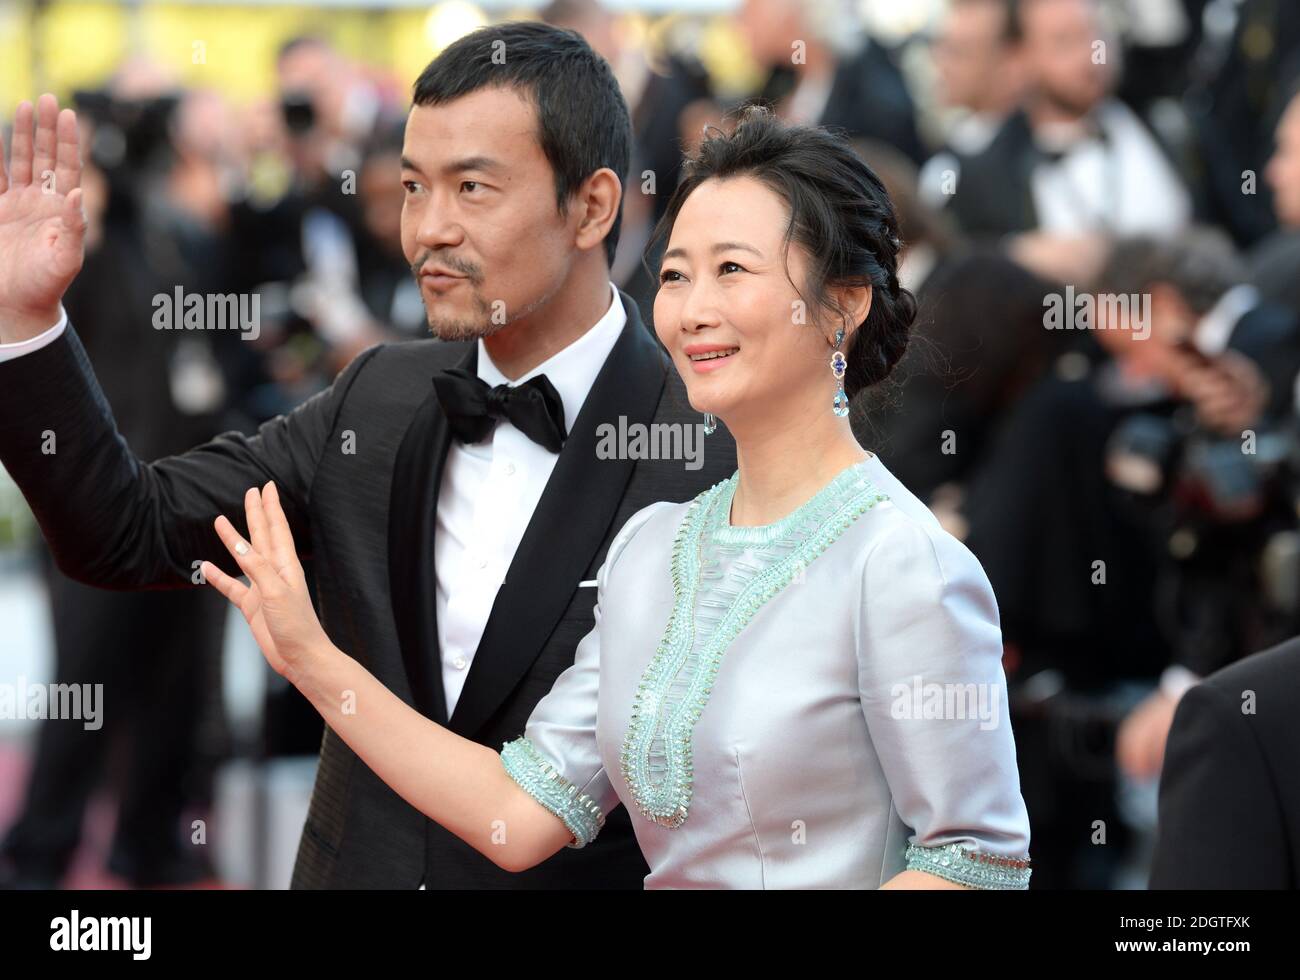 Fan Liao and Tao Zhao attending The Eternals (Ash Is Purest White) premiere  as part of the 71st Cannes Film Festival Stock Photo - Alamy